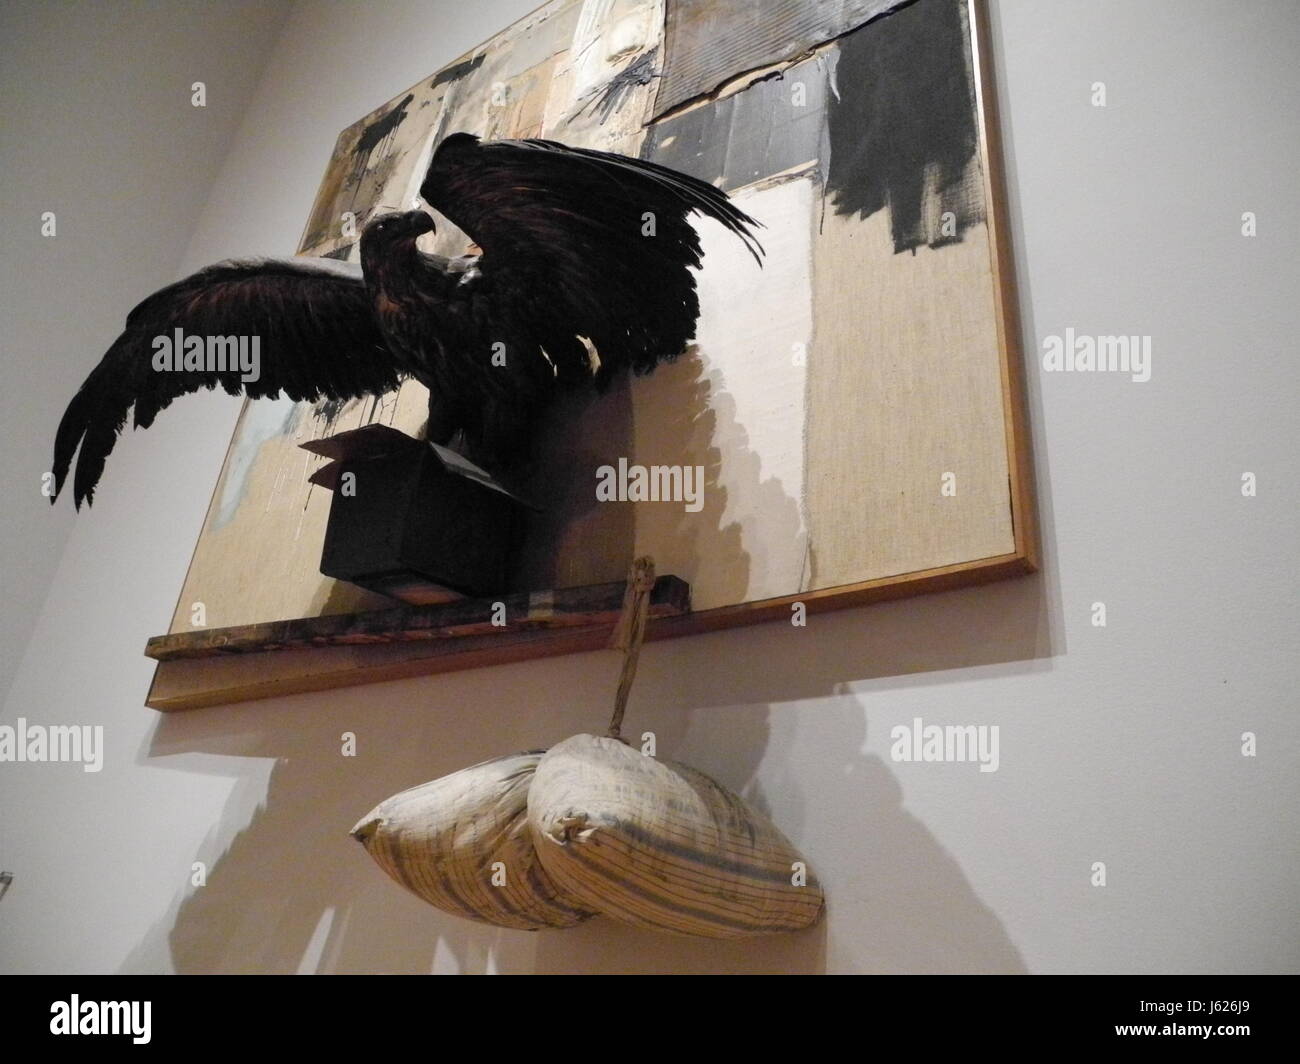 The artwork 'Canyon' by US artist Robert Rauschenberg, part of a retrospective exhibition of Rauschenberg's work which opens on 21 May, at the Museum of Modern Art (MoMA) in New York, 16 May 2017. Photo: Johannes Schmitt-Tegge/dpa Stock Photo